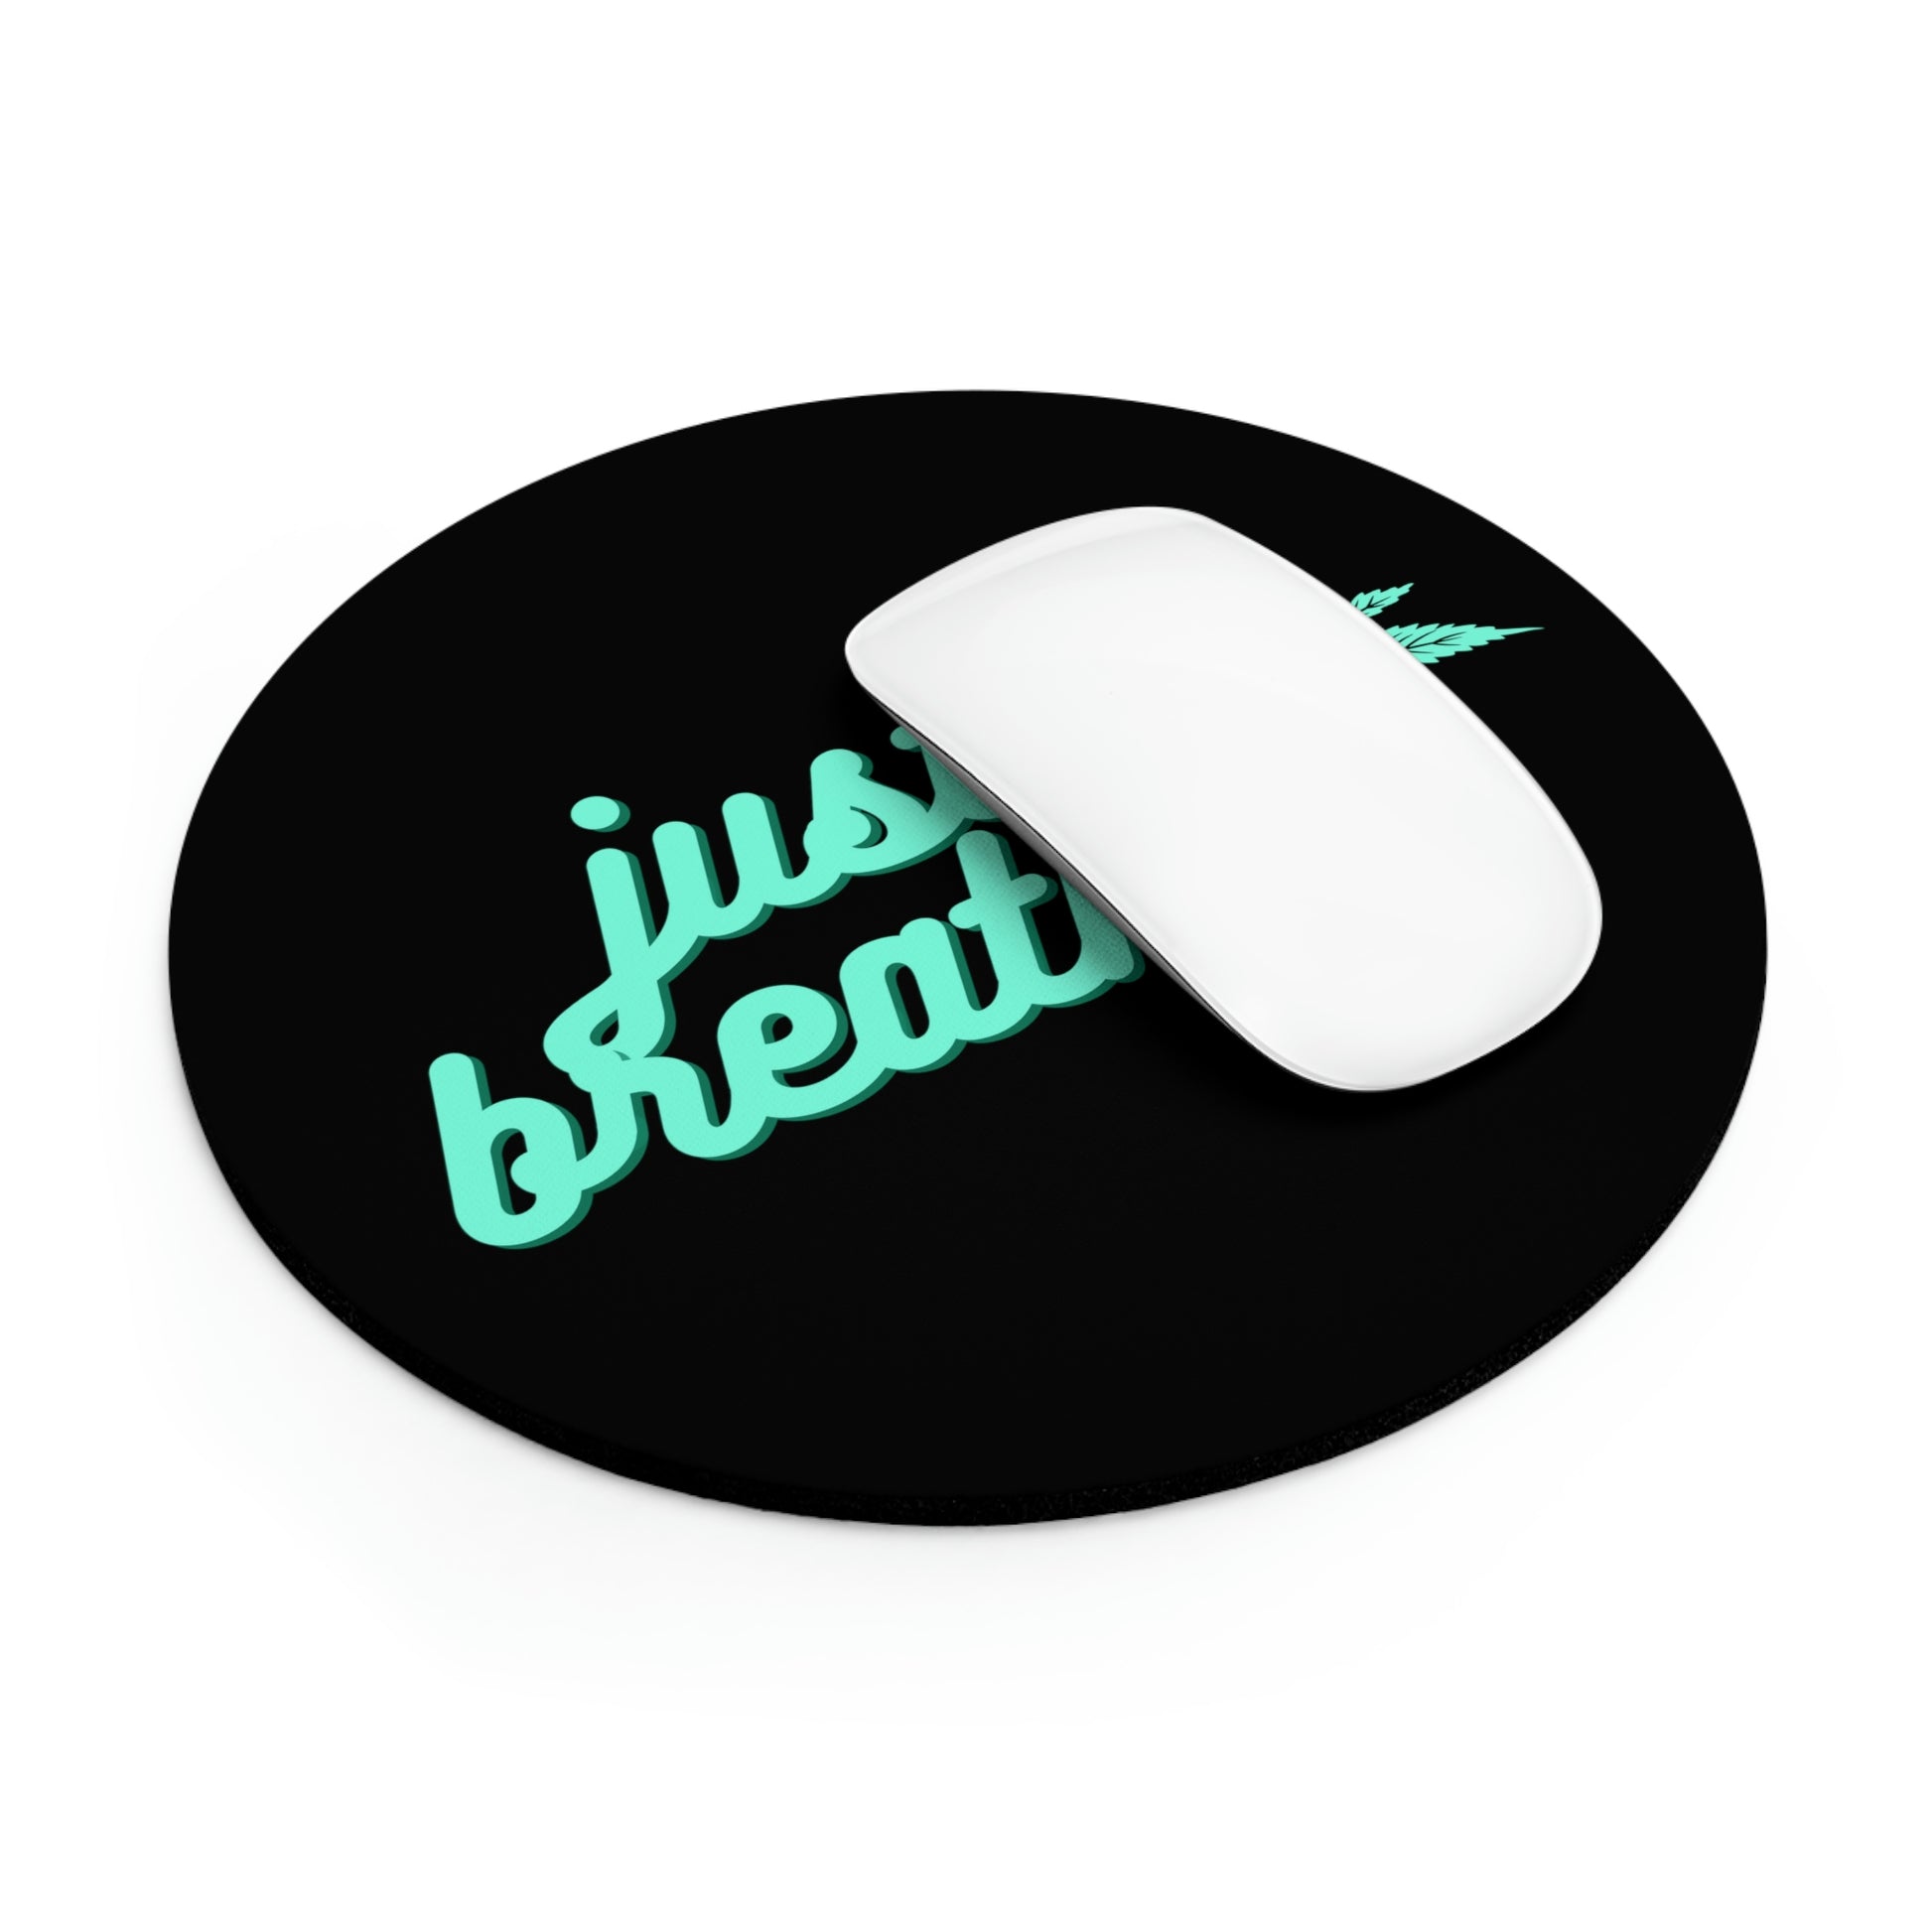 A computer mouse resting on a circular black Just Breathe Cannabis mouse pad with the neon green text "just breathe" and a small graphic design.